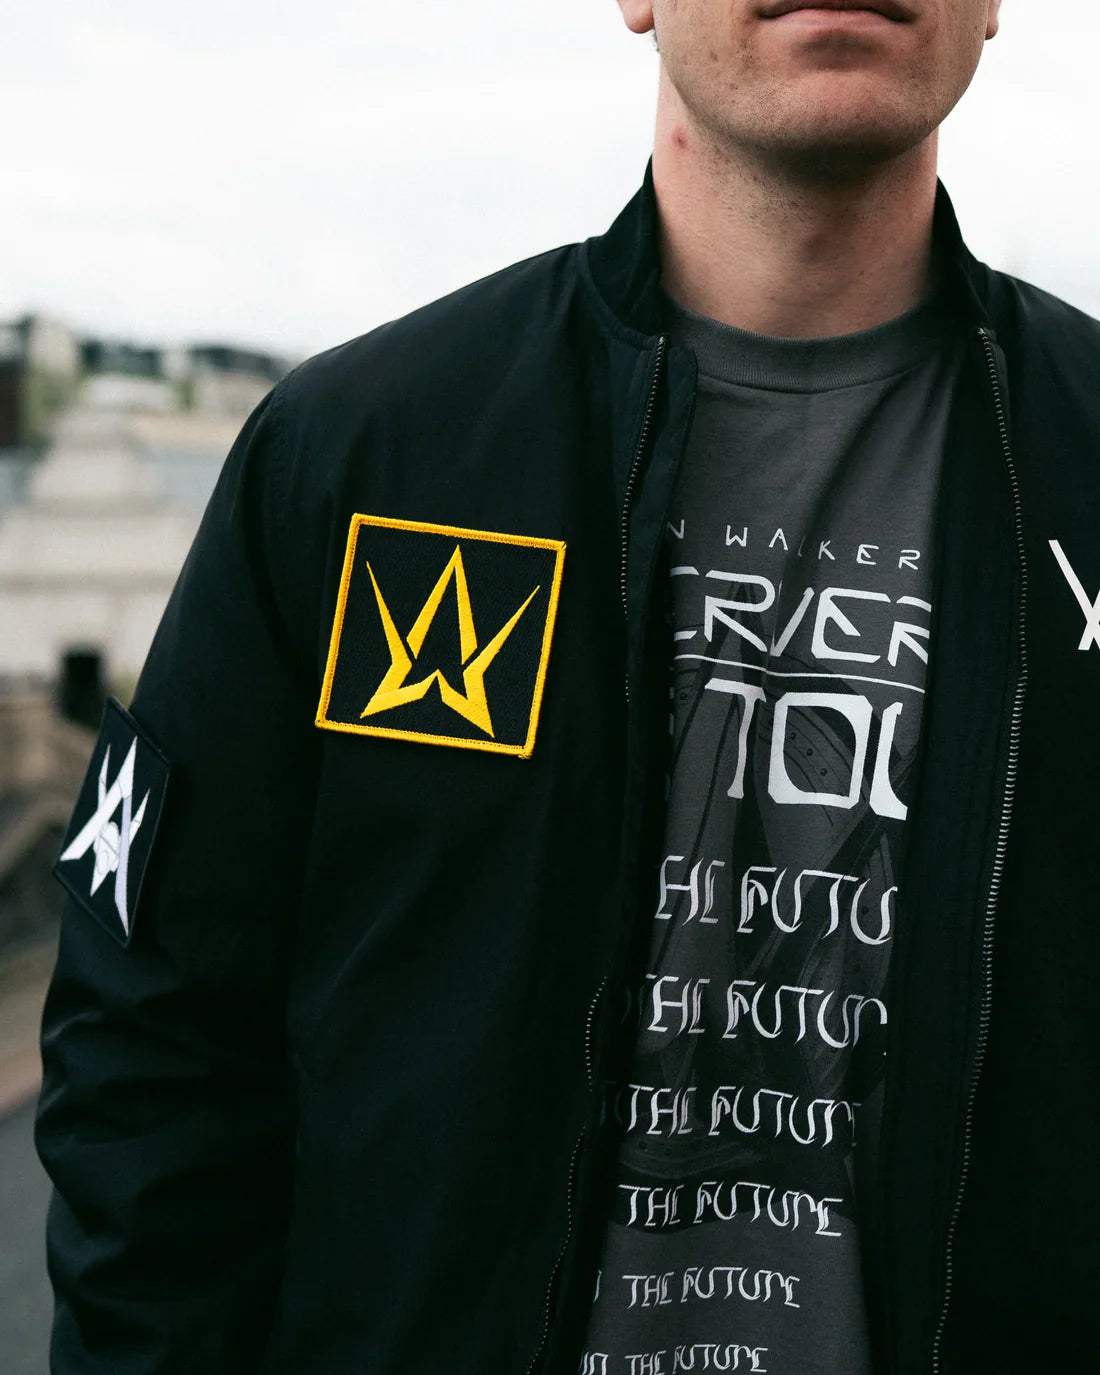 Man wearing a black bomber jacket with a large golden Alan Walker logo on the left sleeve and a smaller white logo on the right, over a T-shirt with Alan Walker's repeated 'Different World' album text.